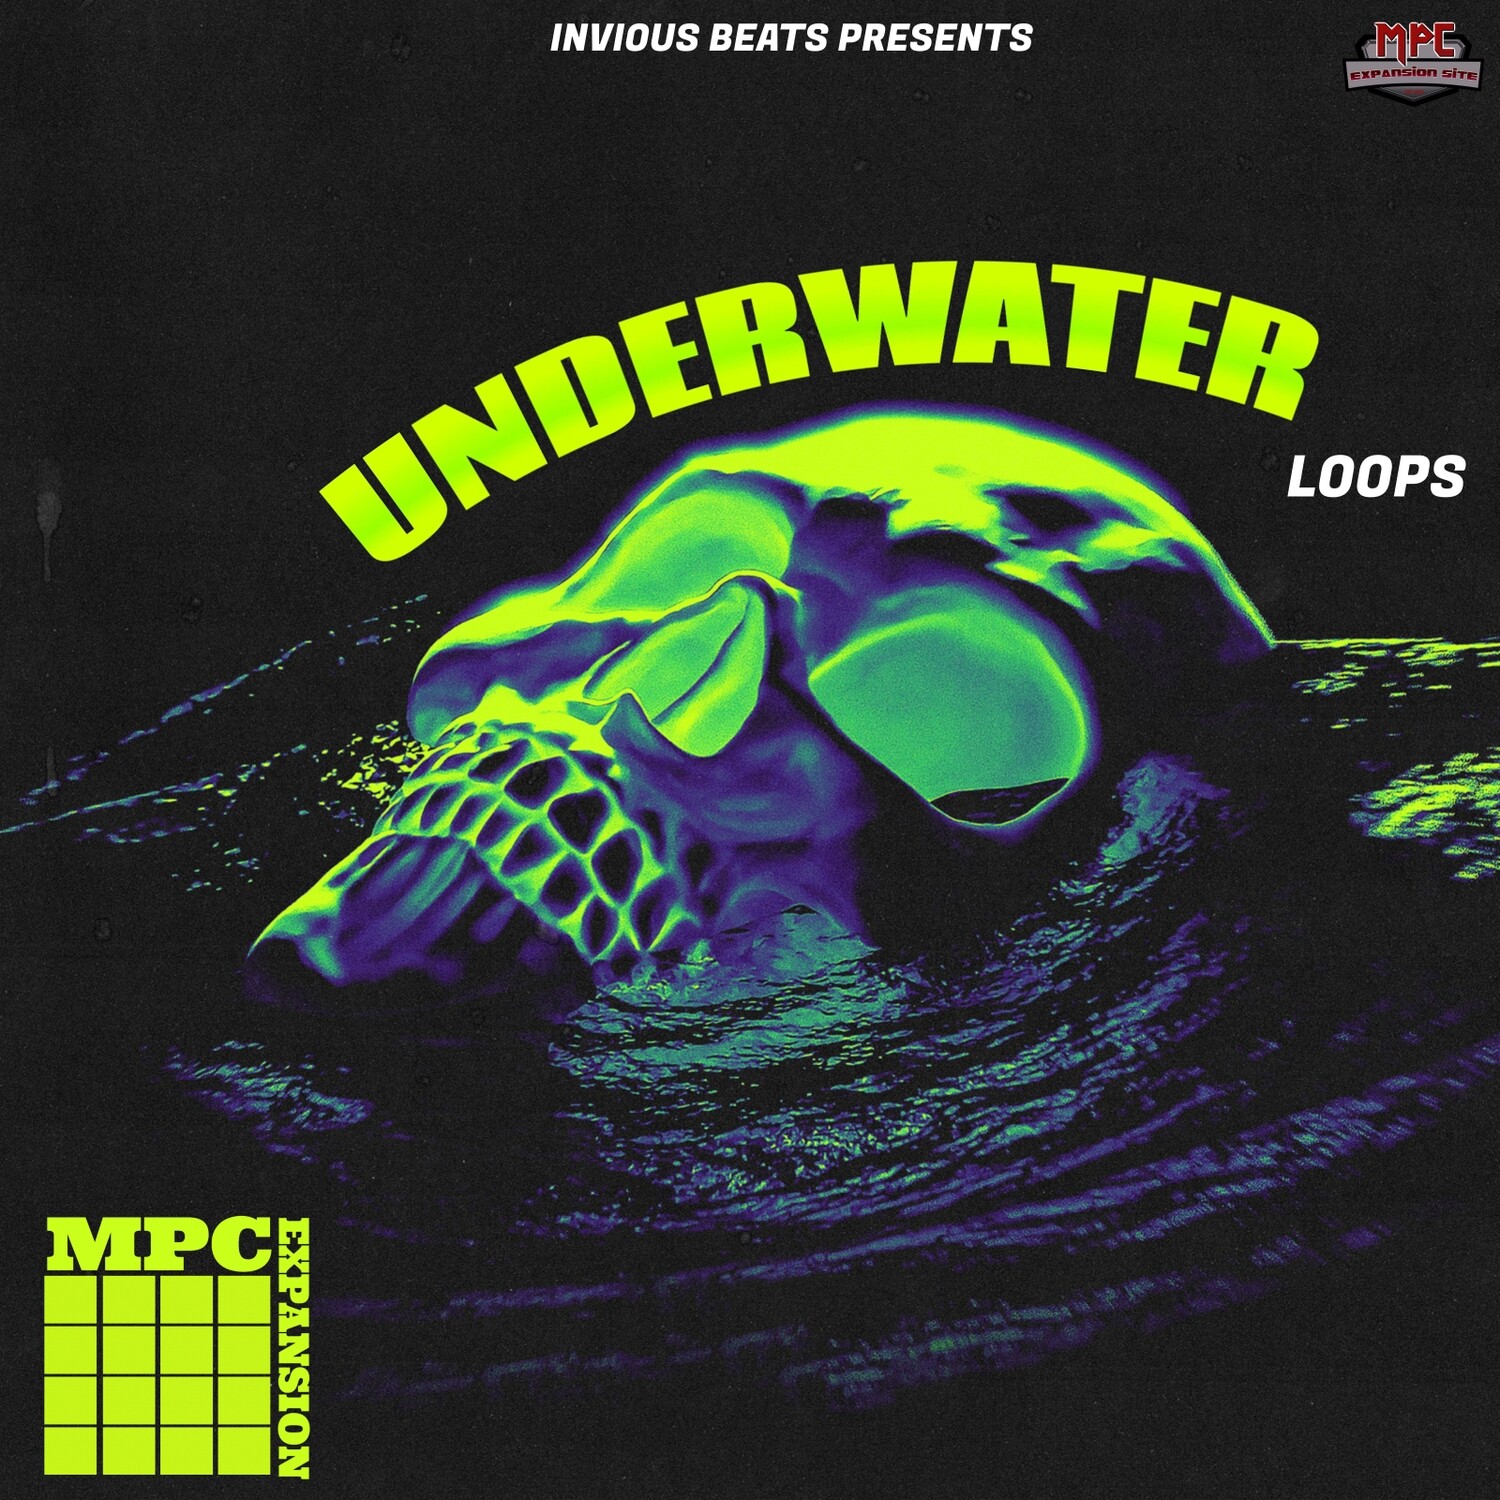 MPC EXPANSION 'UNDERWATER LOOPS' by INVIOUS